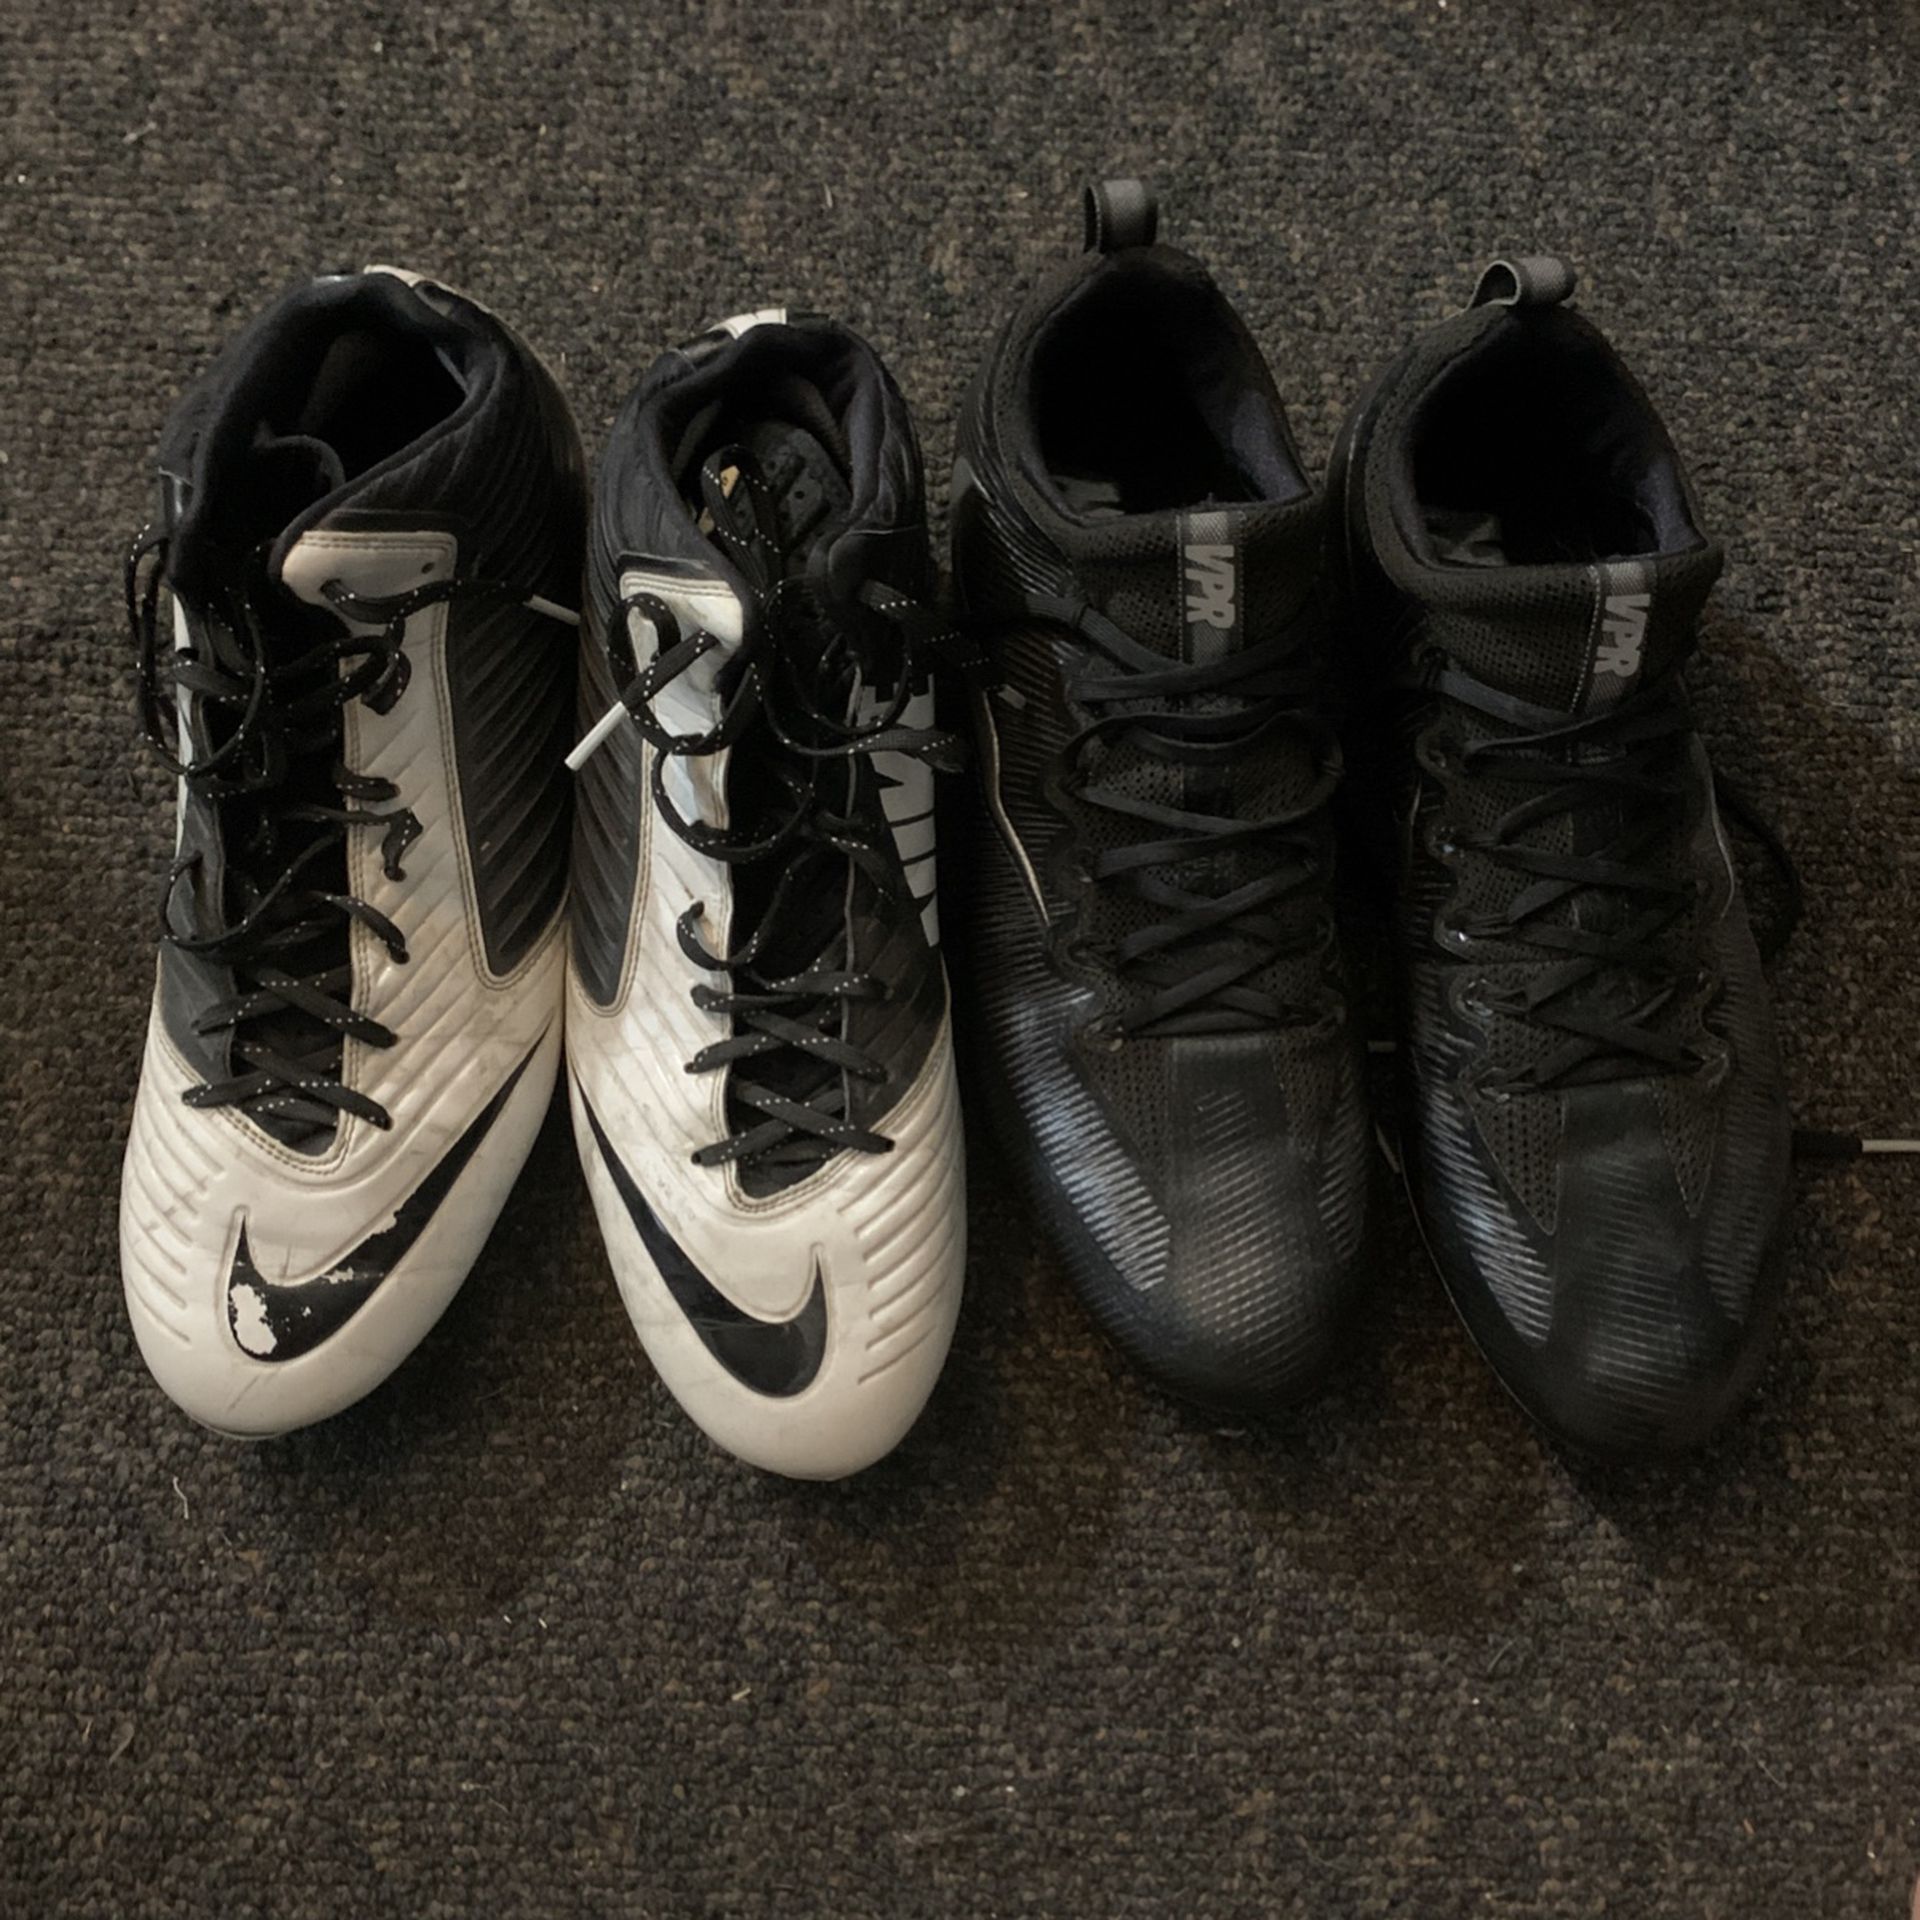 2 Pairs Of Cleats 